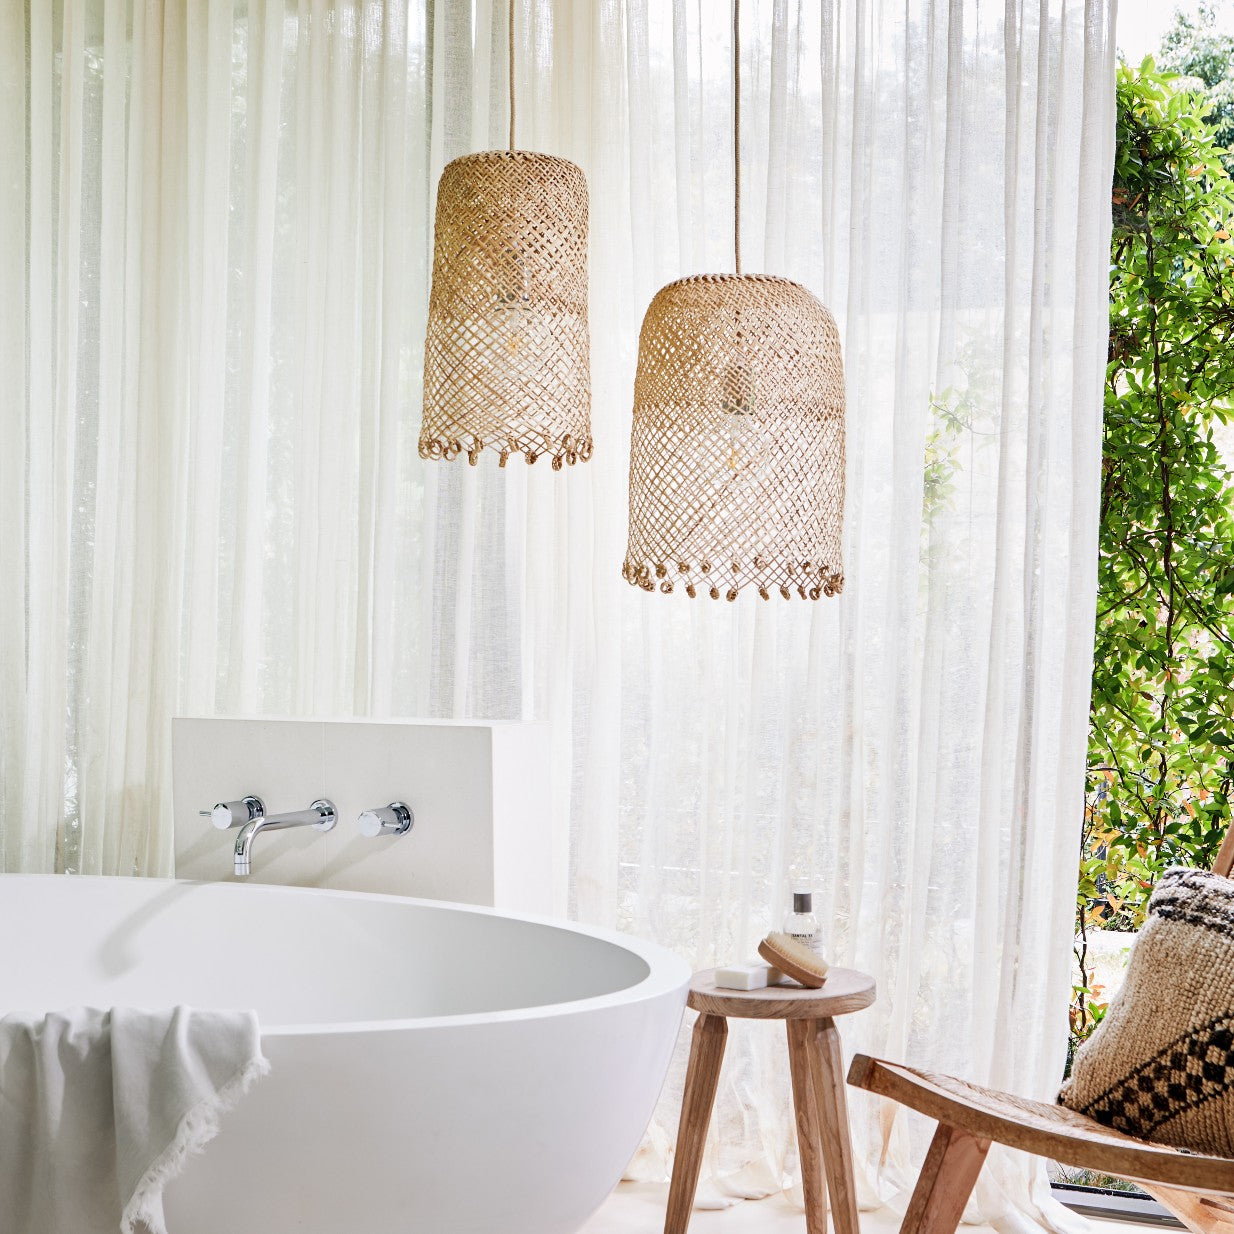 Luxurious-lifestyle-photo-of-Natural-coastal-style-lighting-showing-a-small-and-a-medium-borneo-basket-light-shade-with-open-weave-and-ring-detail-at-the-bottom-hanging-above-a-free-standing-bath-with-teak-side-table-and-teak-chair